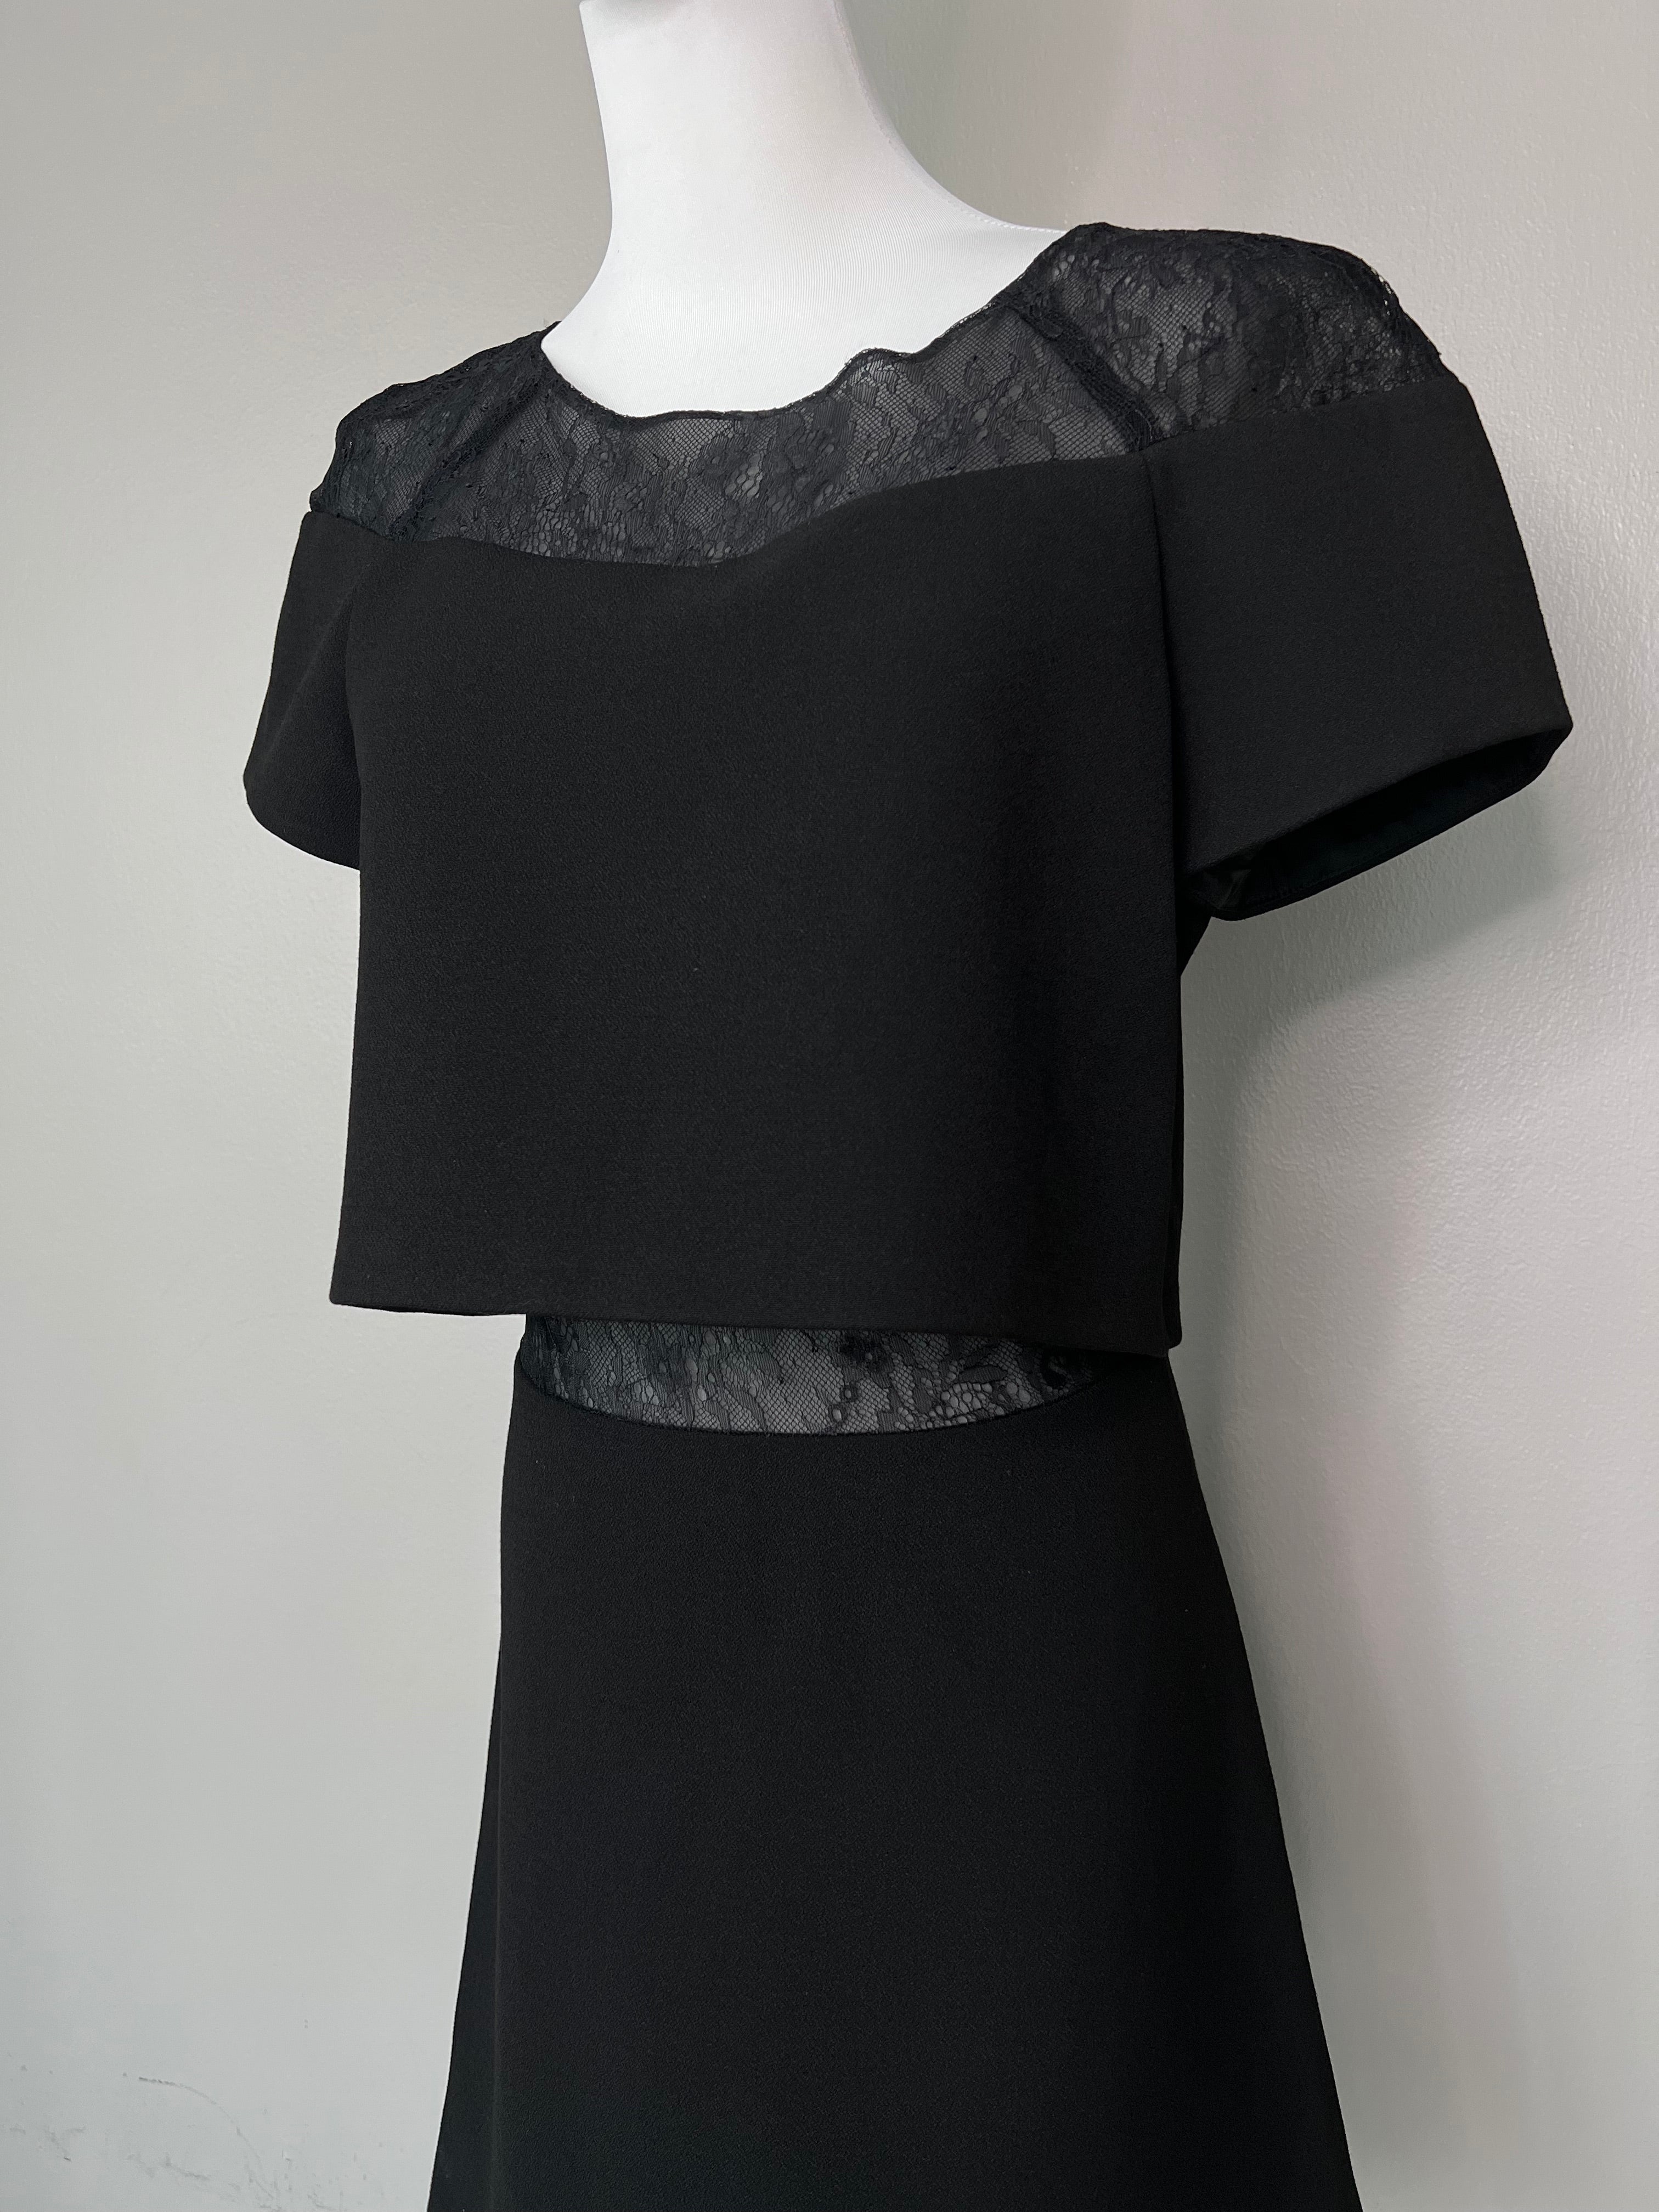 Black sheer 2 in one top and skirt dress MAJE